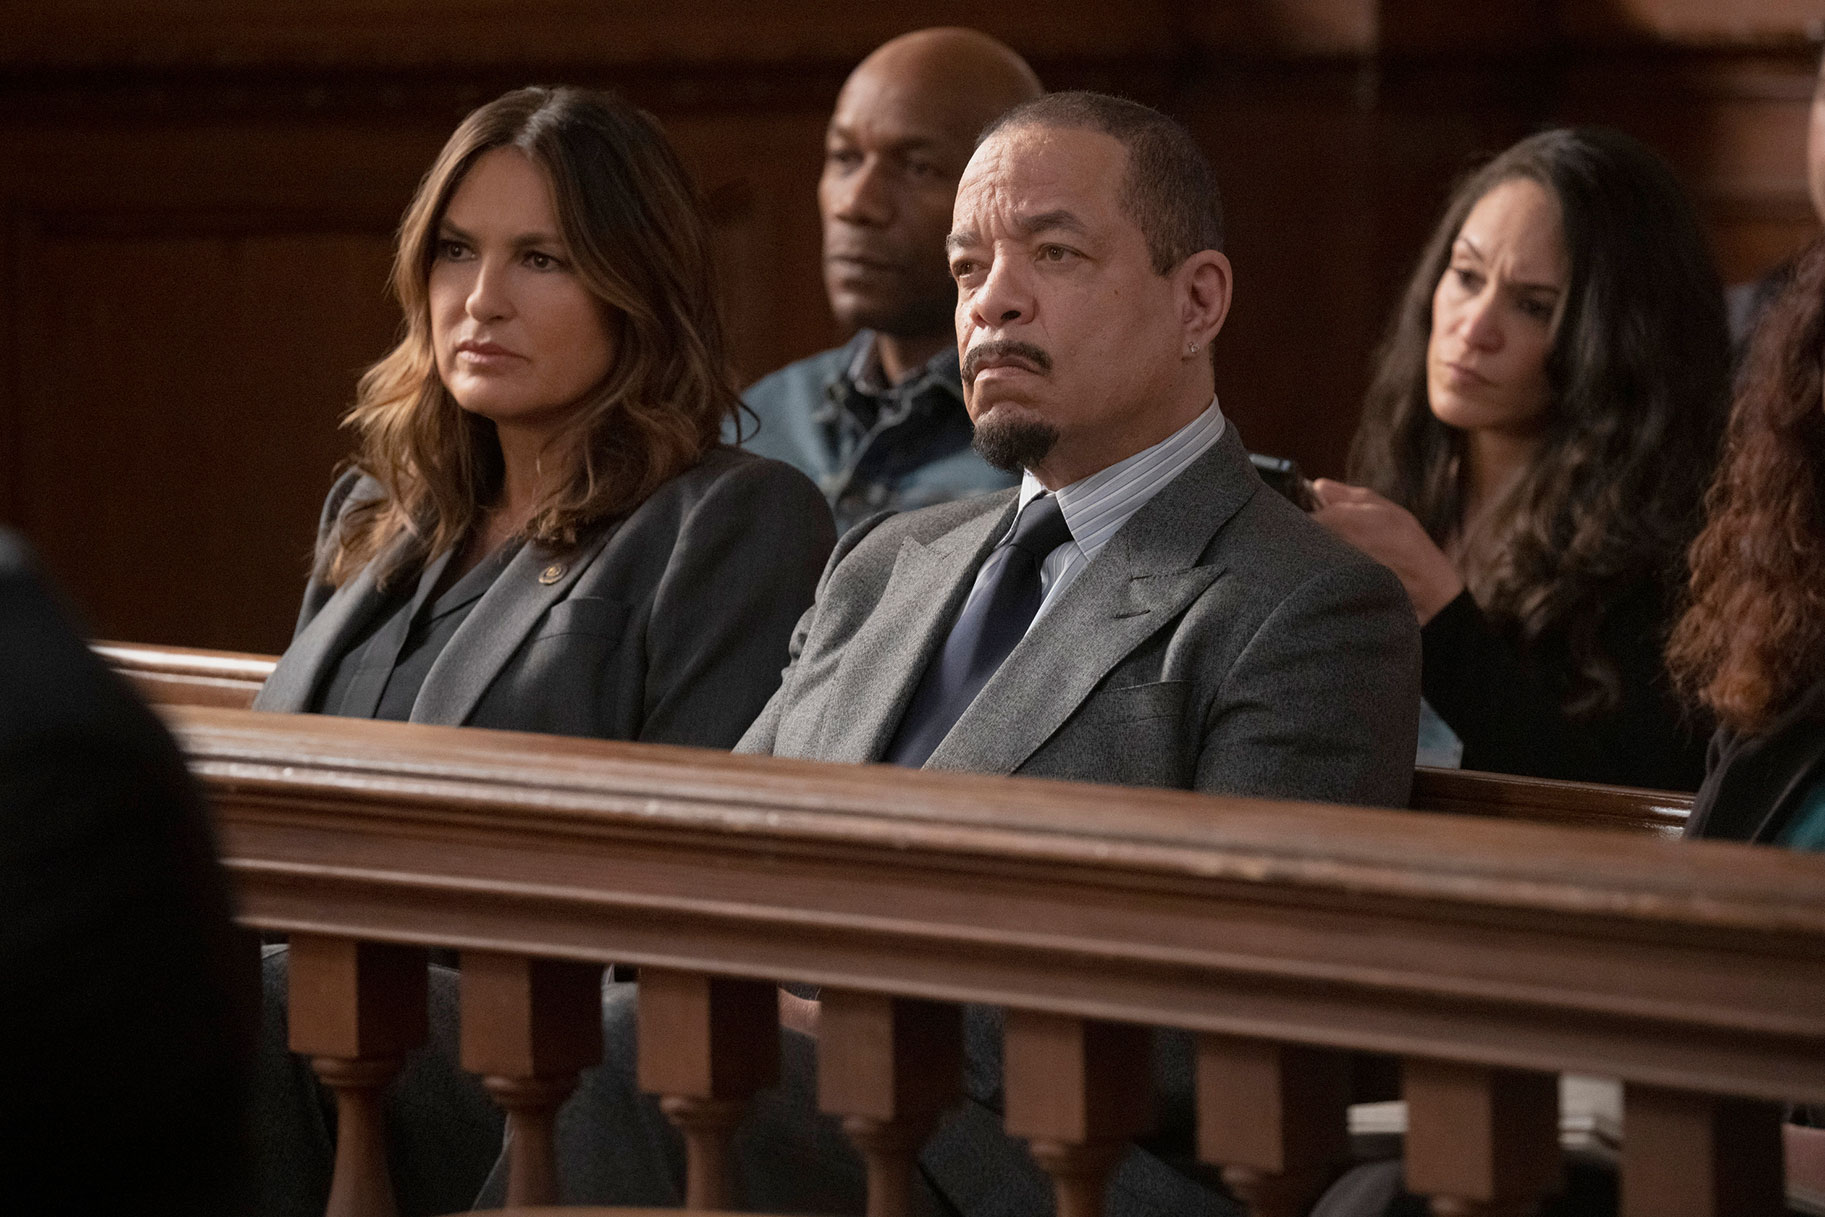 Captain Olivia Benson anqd Sergeant Odafin "Fin" Tutuola sitting together in a courtroom